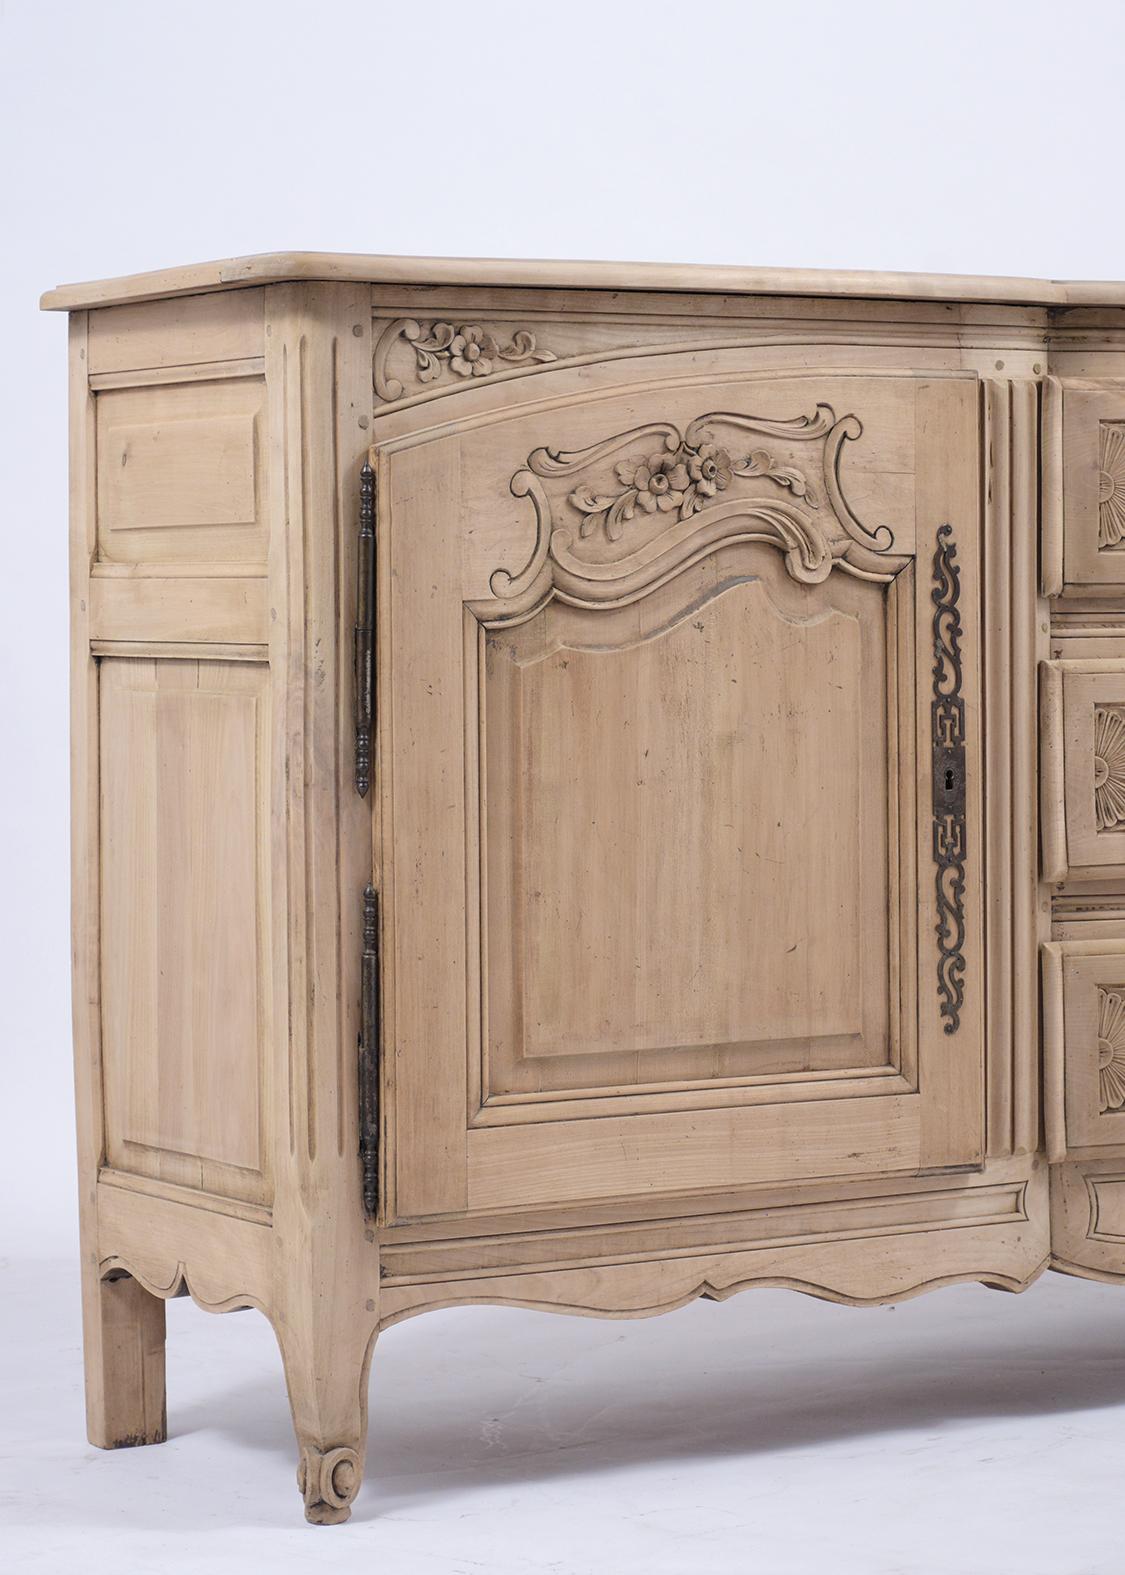 19th Century Louis XV Walnut Buffet with Hand-Carved Details and Iron Accents